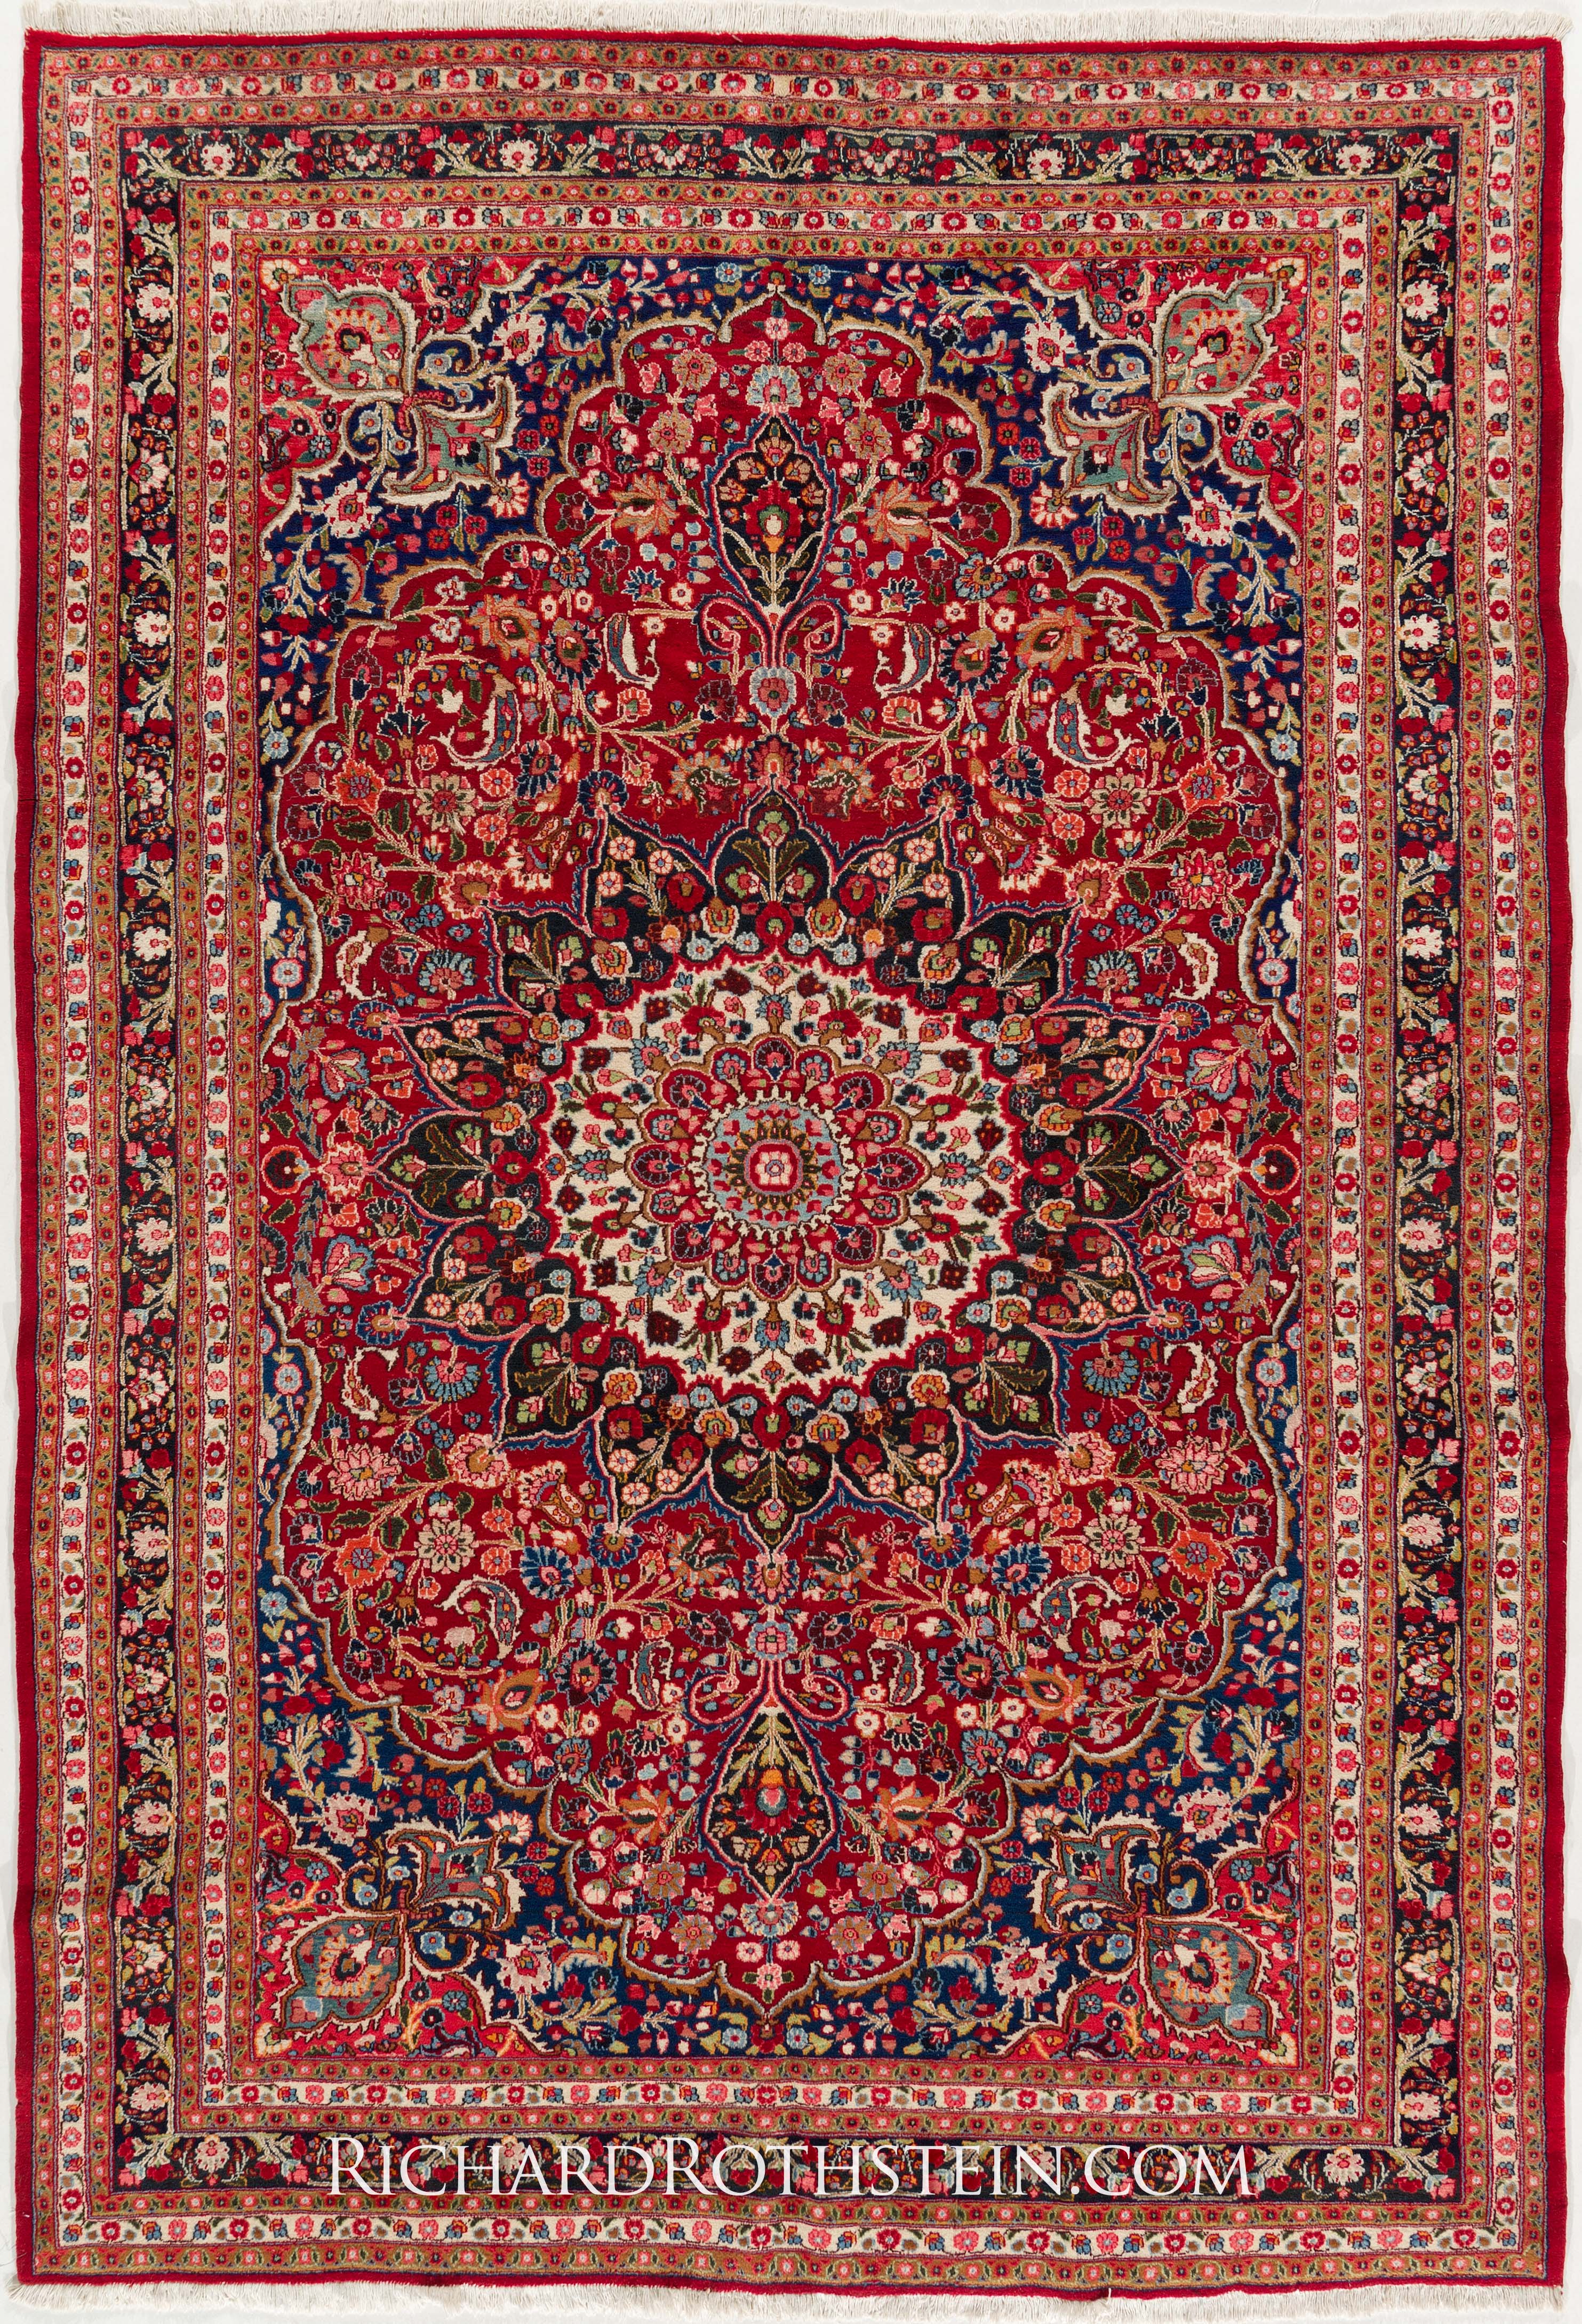 persian carpets and rugs marvelous buy persian rugs #2 buy a prized possession of your house to LASDPIZ